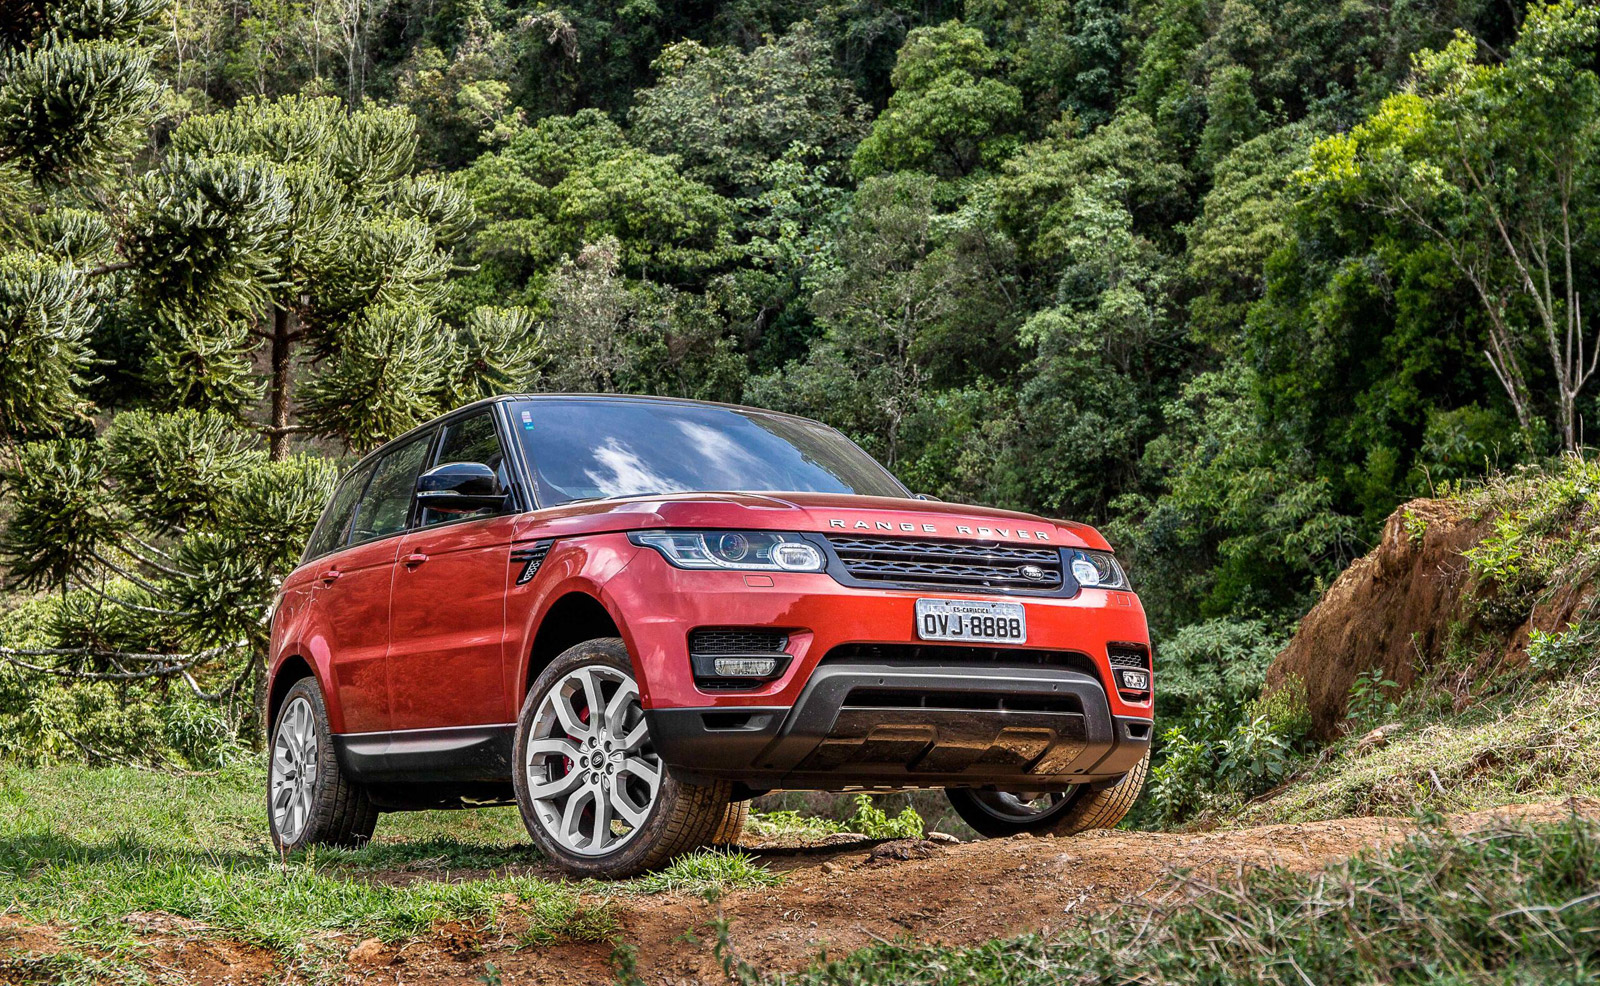 2014 Land Range Rover Sport Review, Ratings, Prices, and Photos - The Car Connection